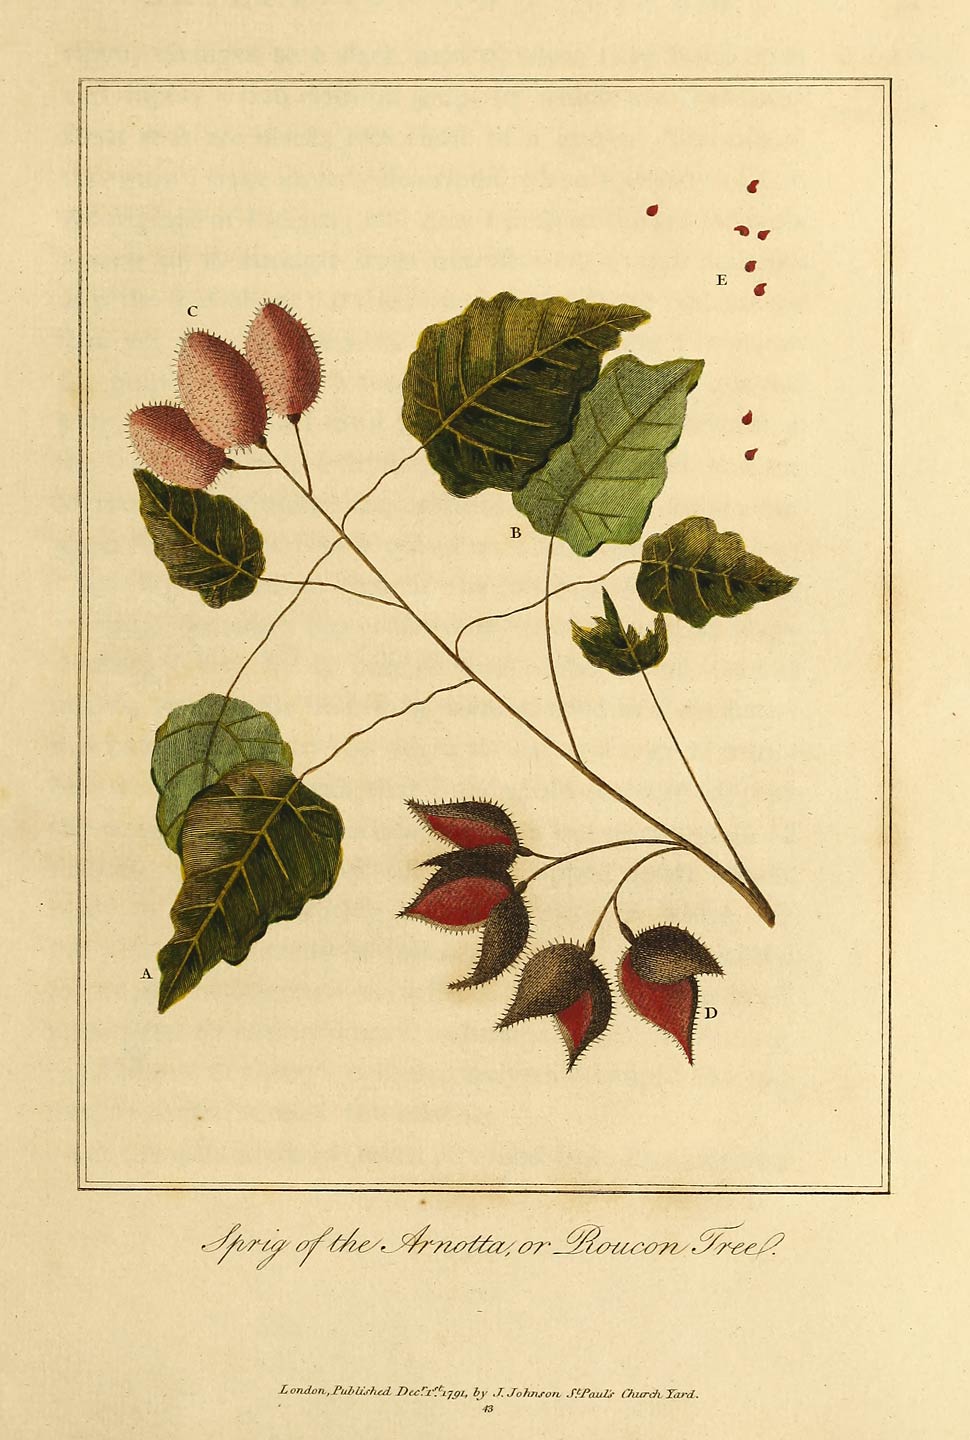 Sprig of the Arnotta, or Roucou Tree.